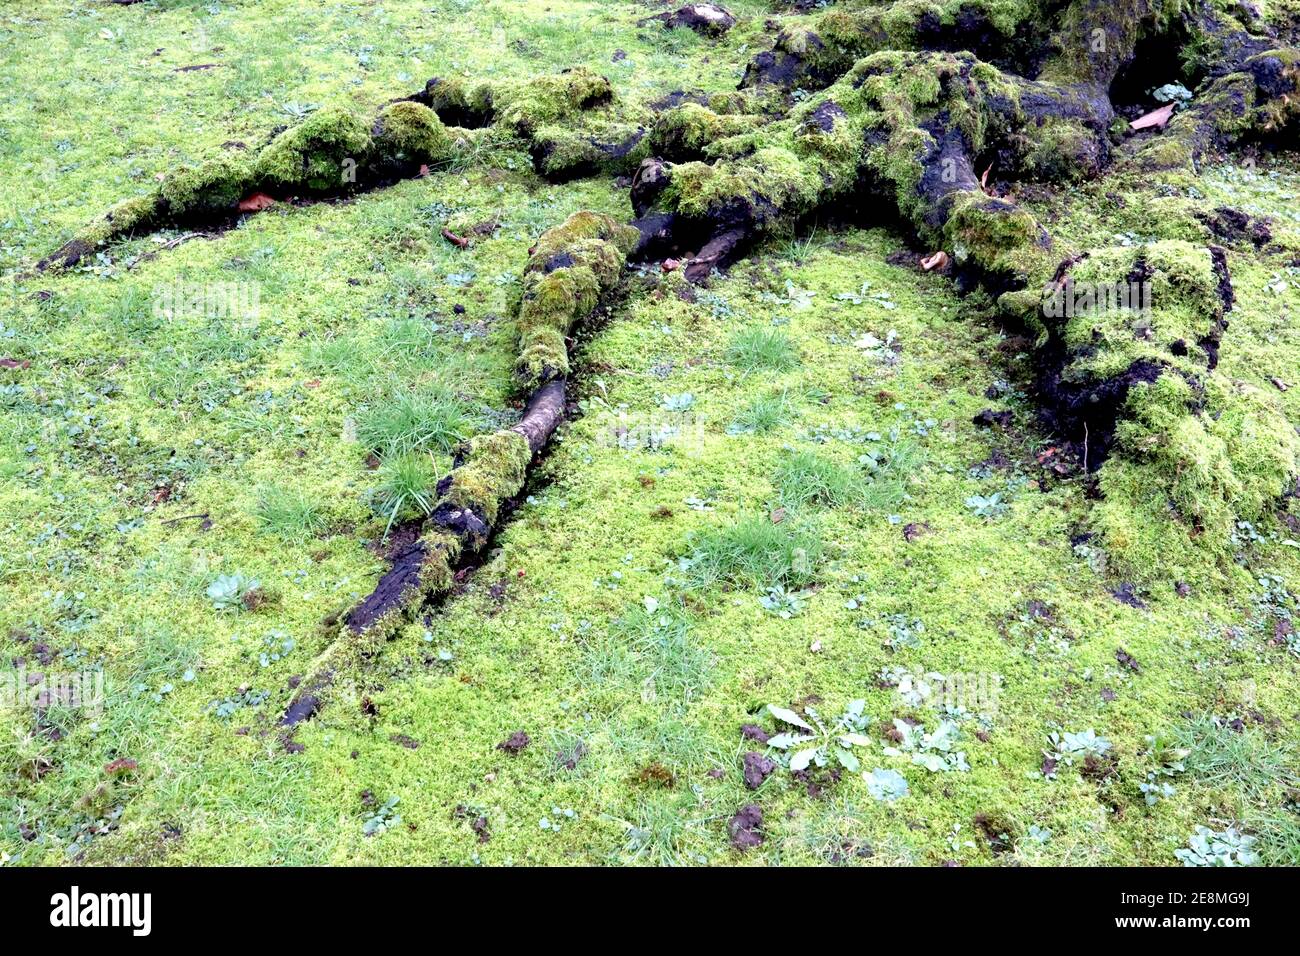 Bryophyta or moss lawn Stock Photo